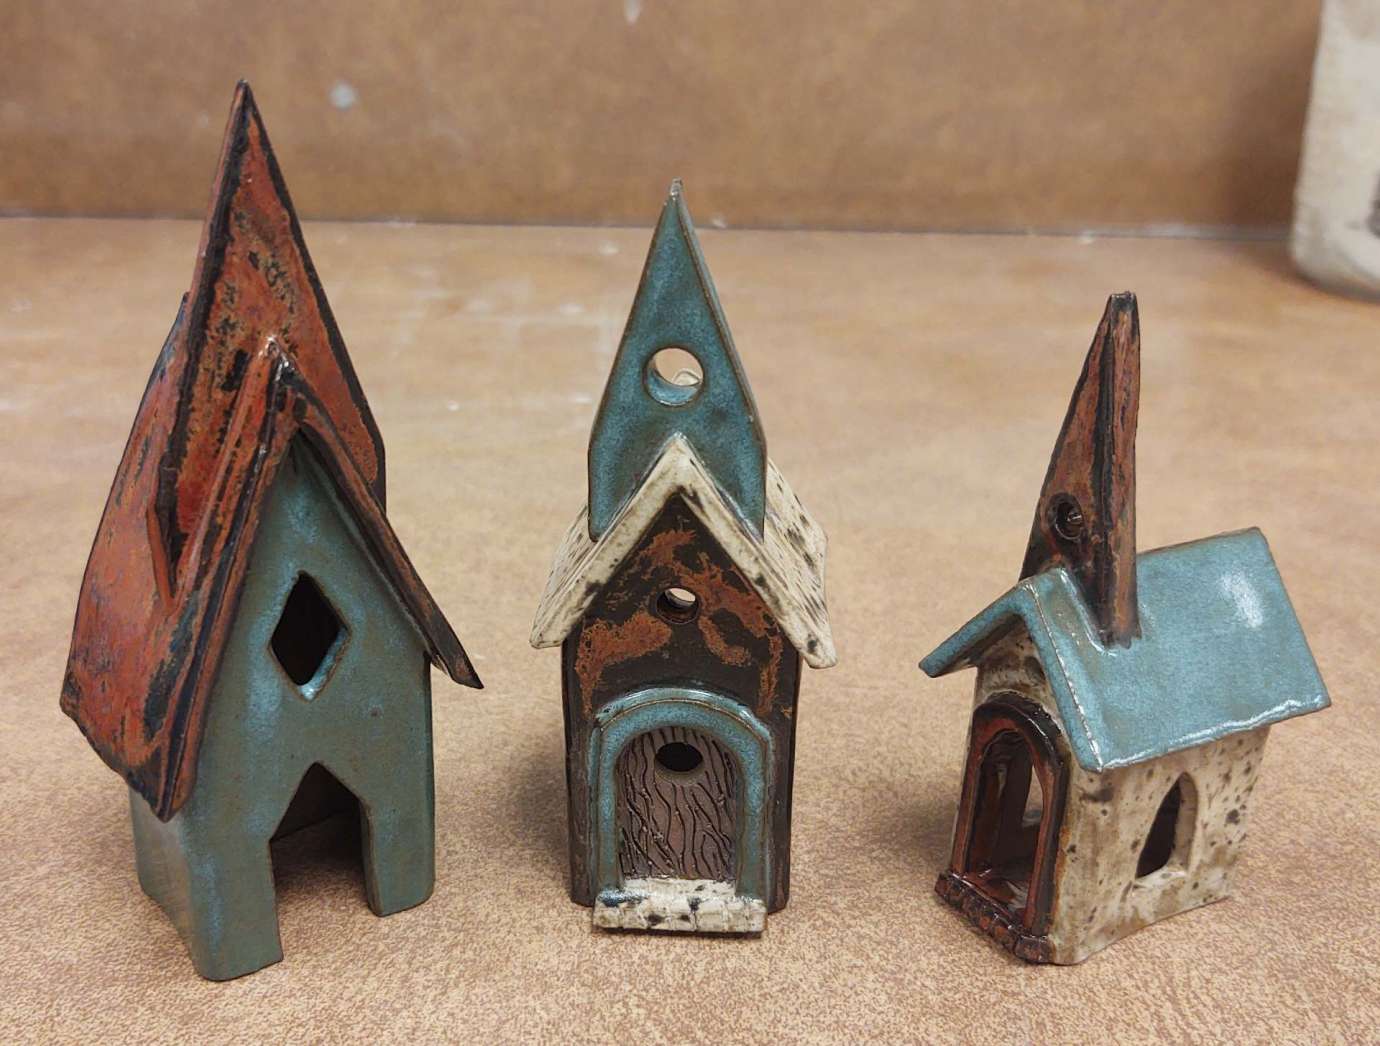 a set of three ceramic churches with colorful steeples